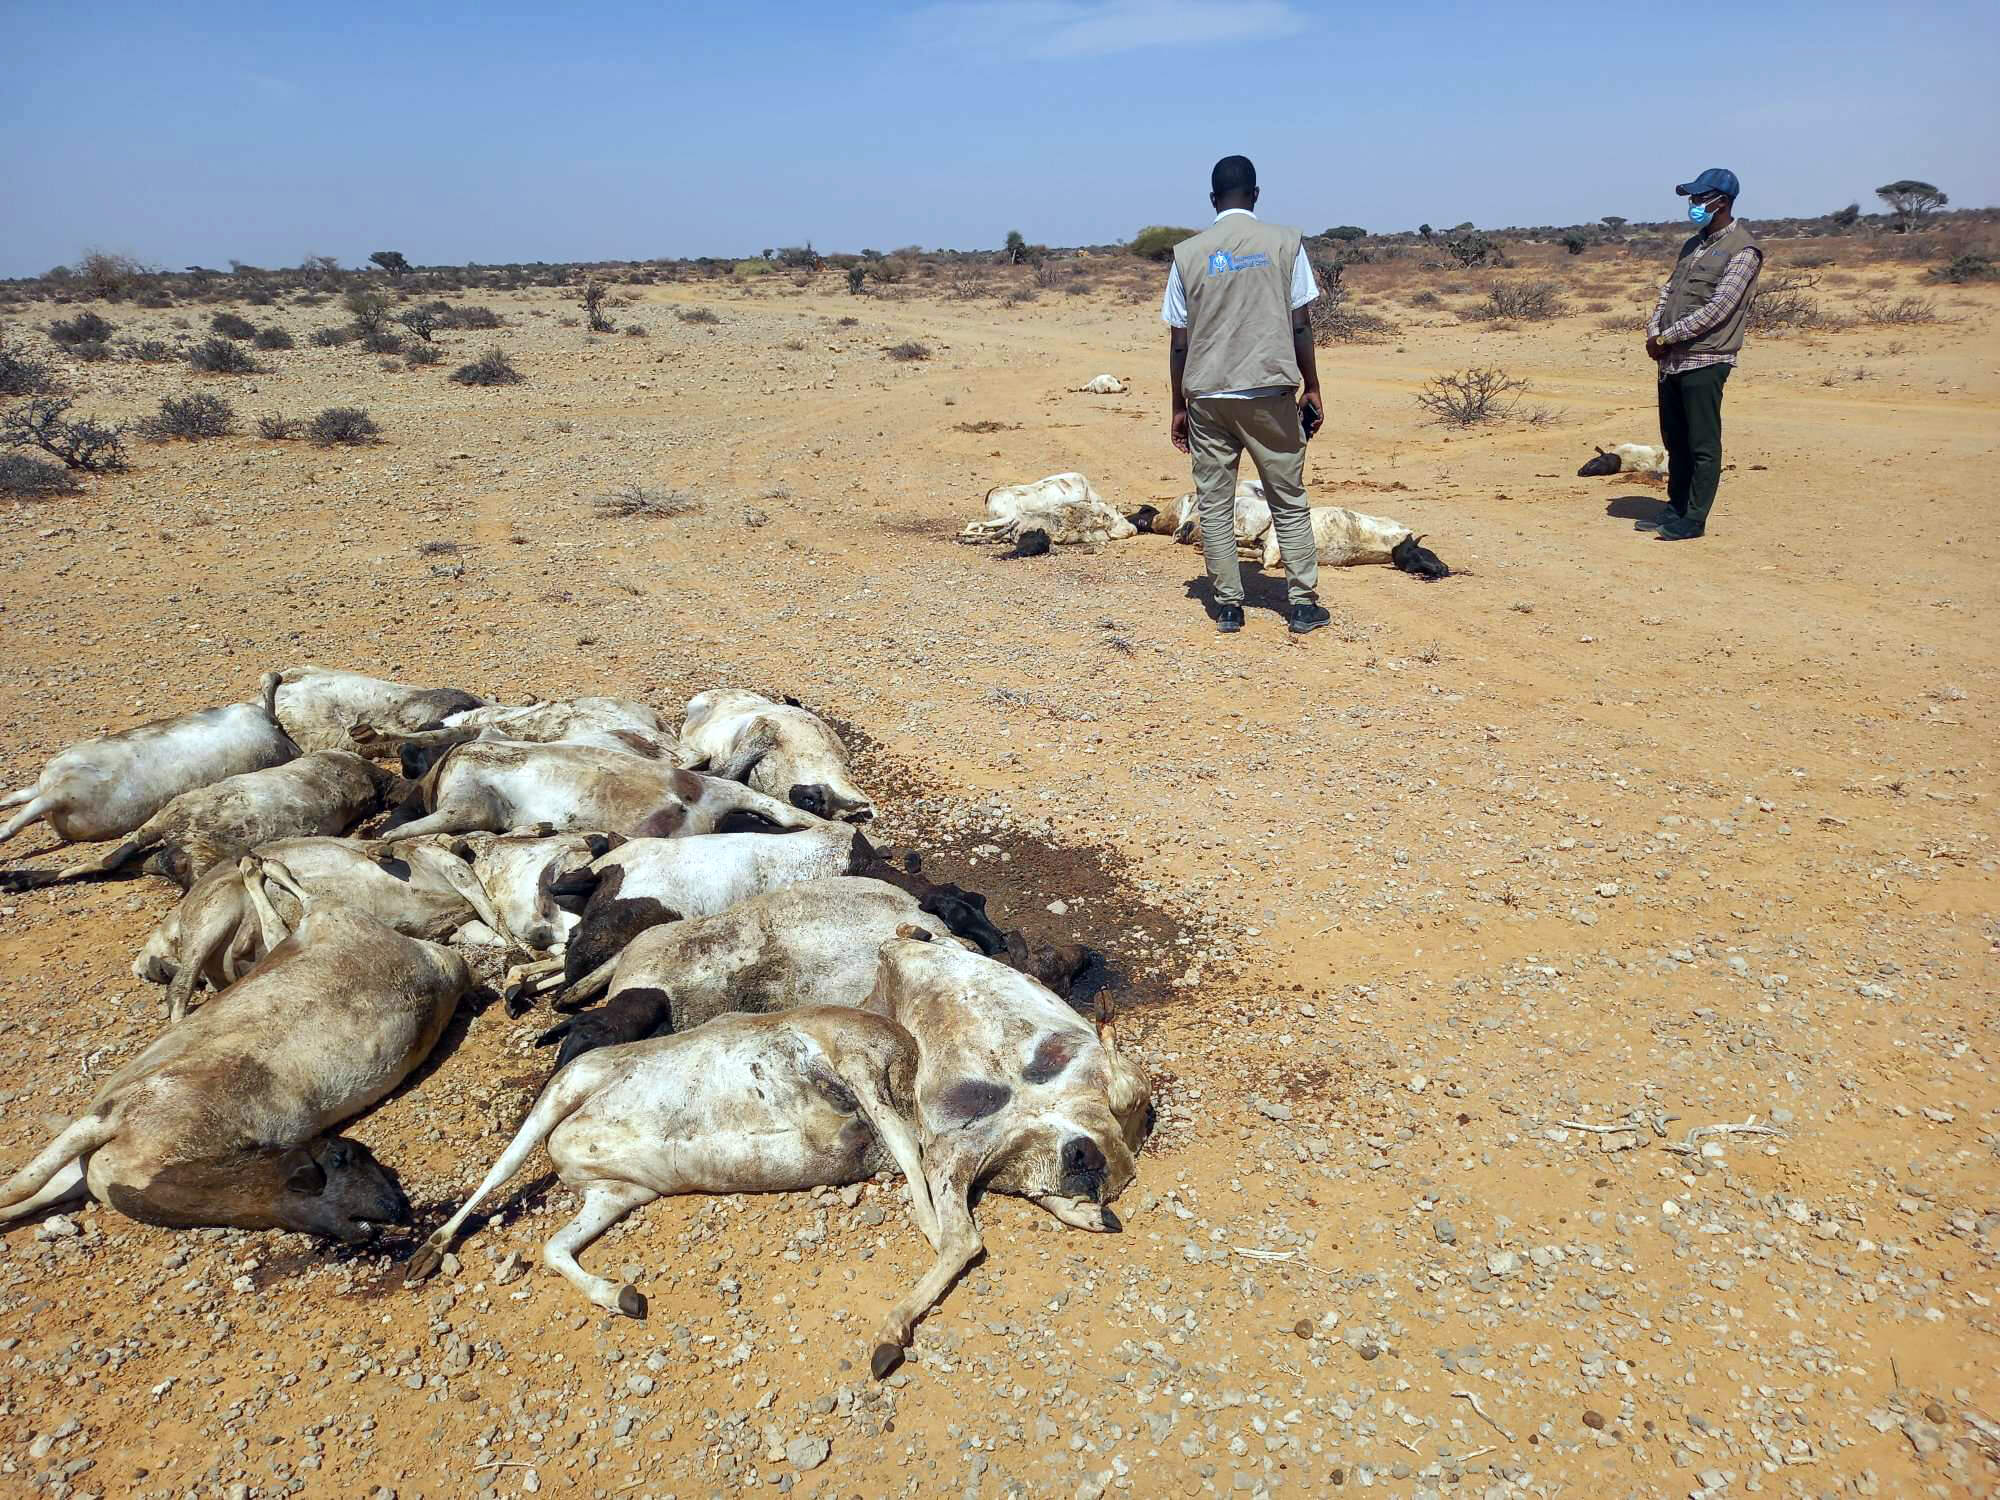 Dehydrated cattle in Ethiopia.